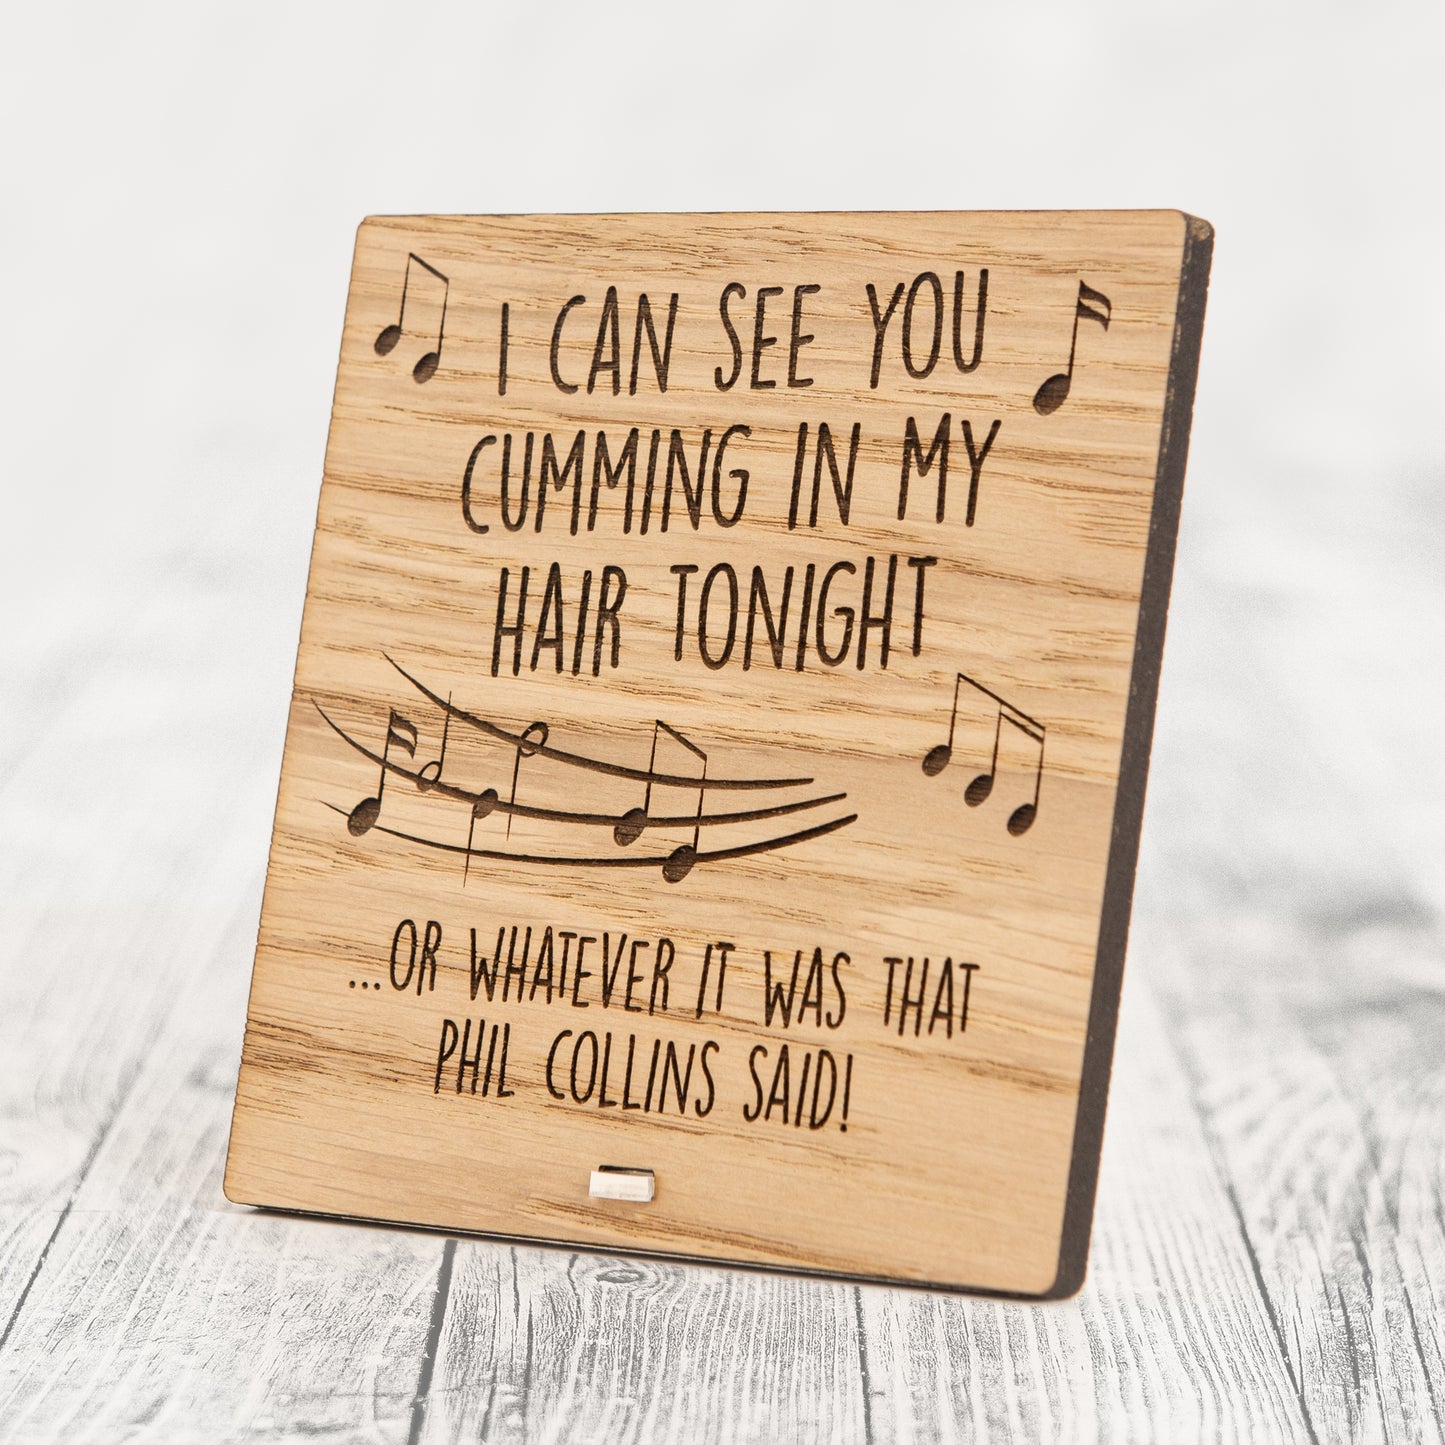 PHIL COLLINS - Rude Song Lyrics - Funny Valentines Day Plaque